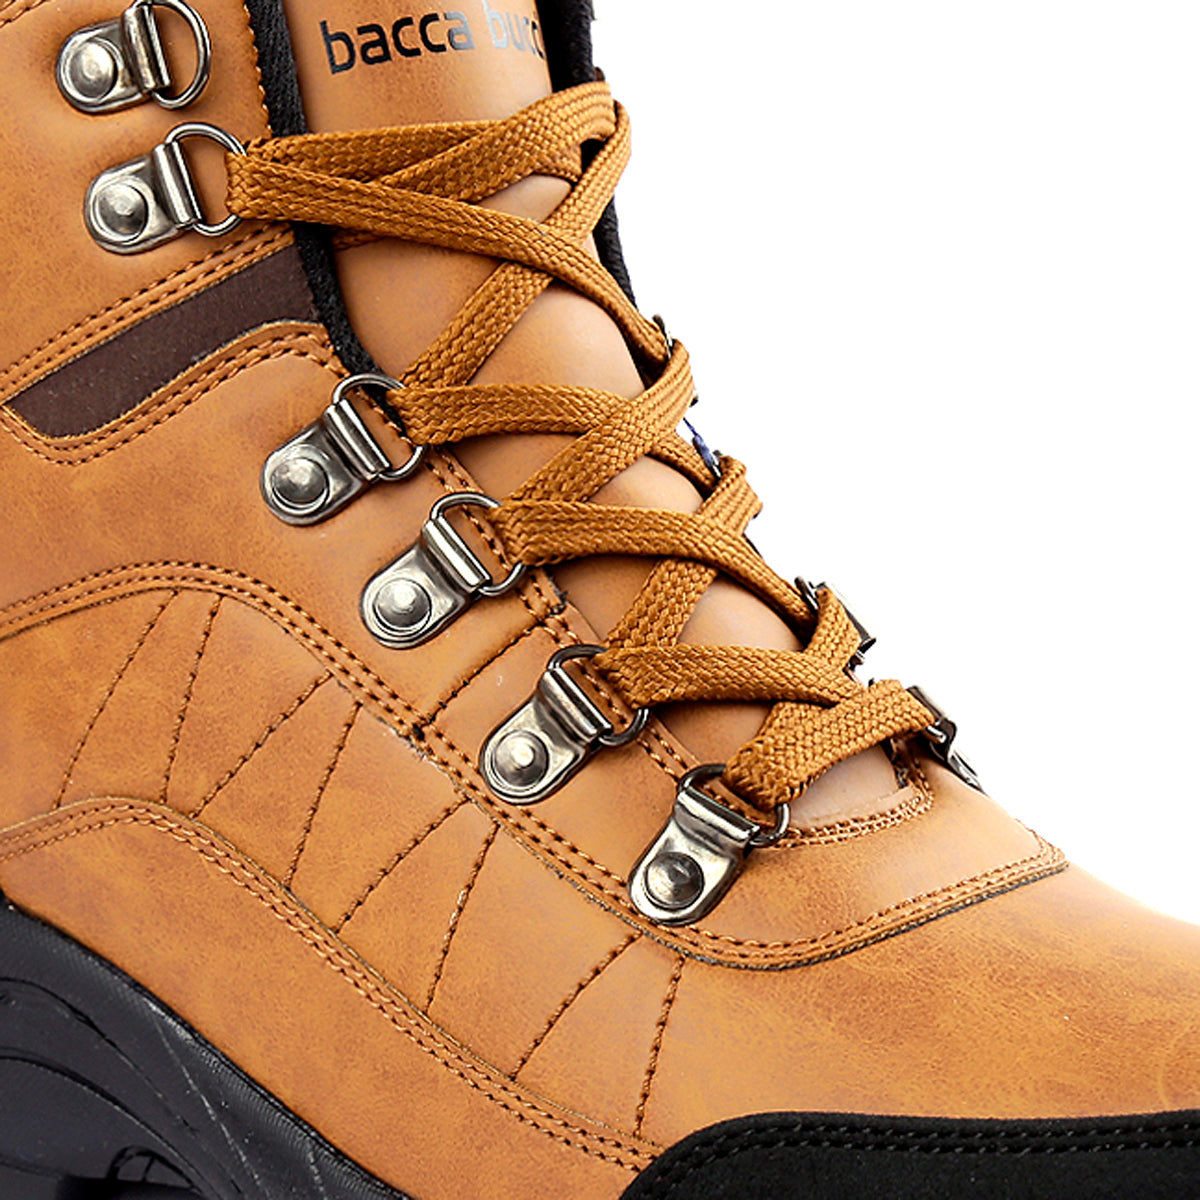 mens waterproof boots , best snow boots, high top ankle boots